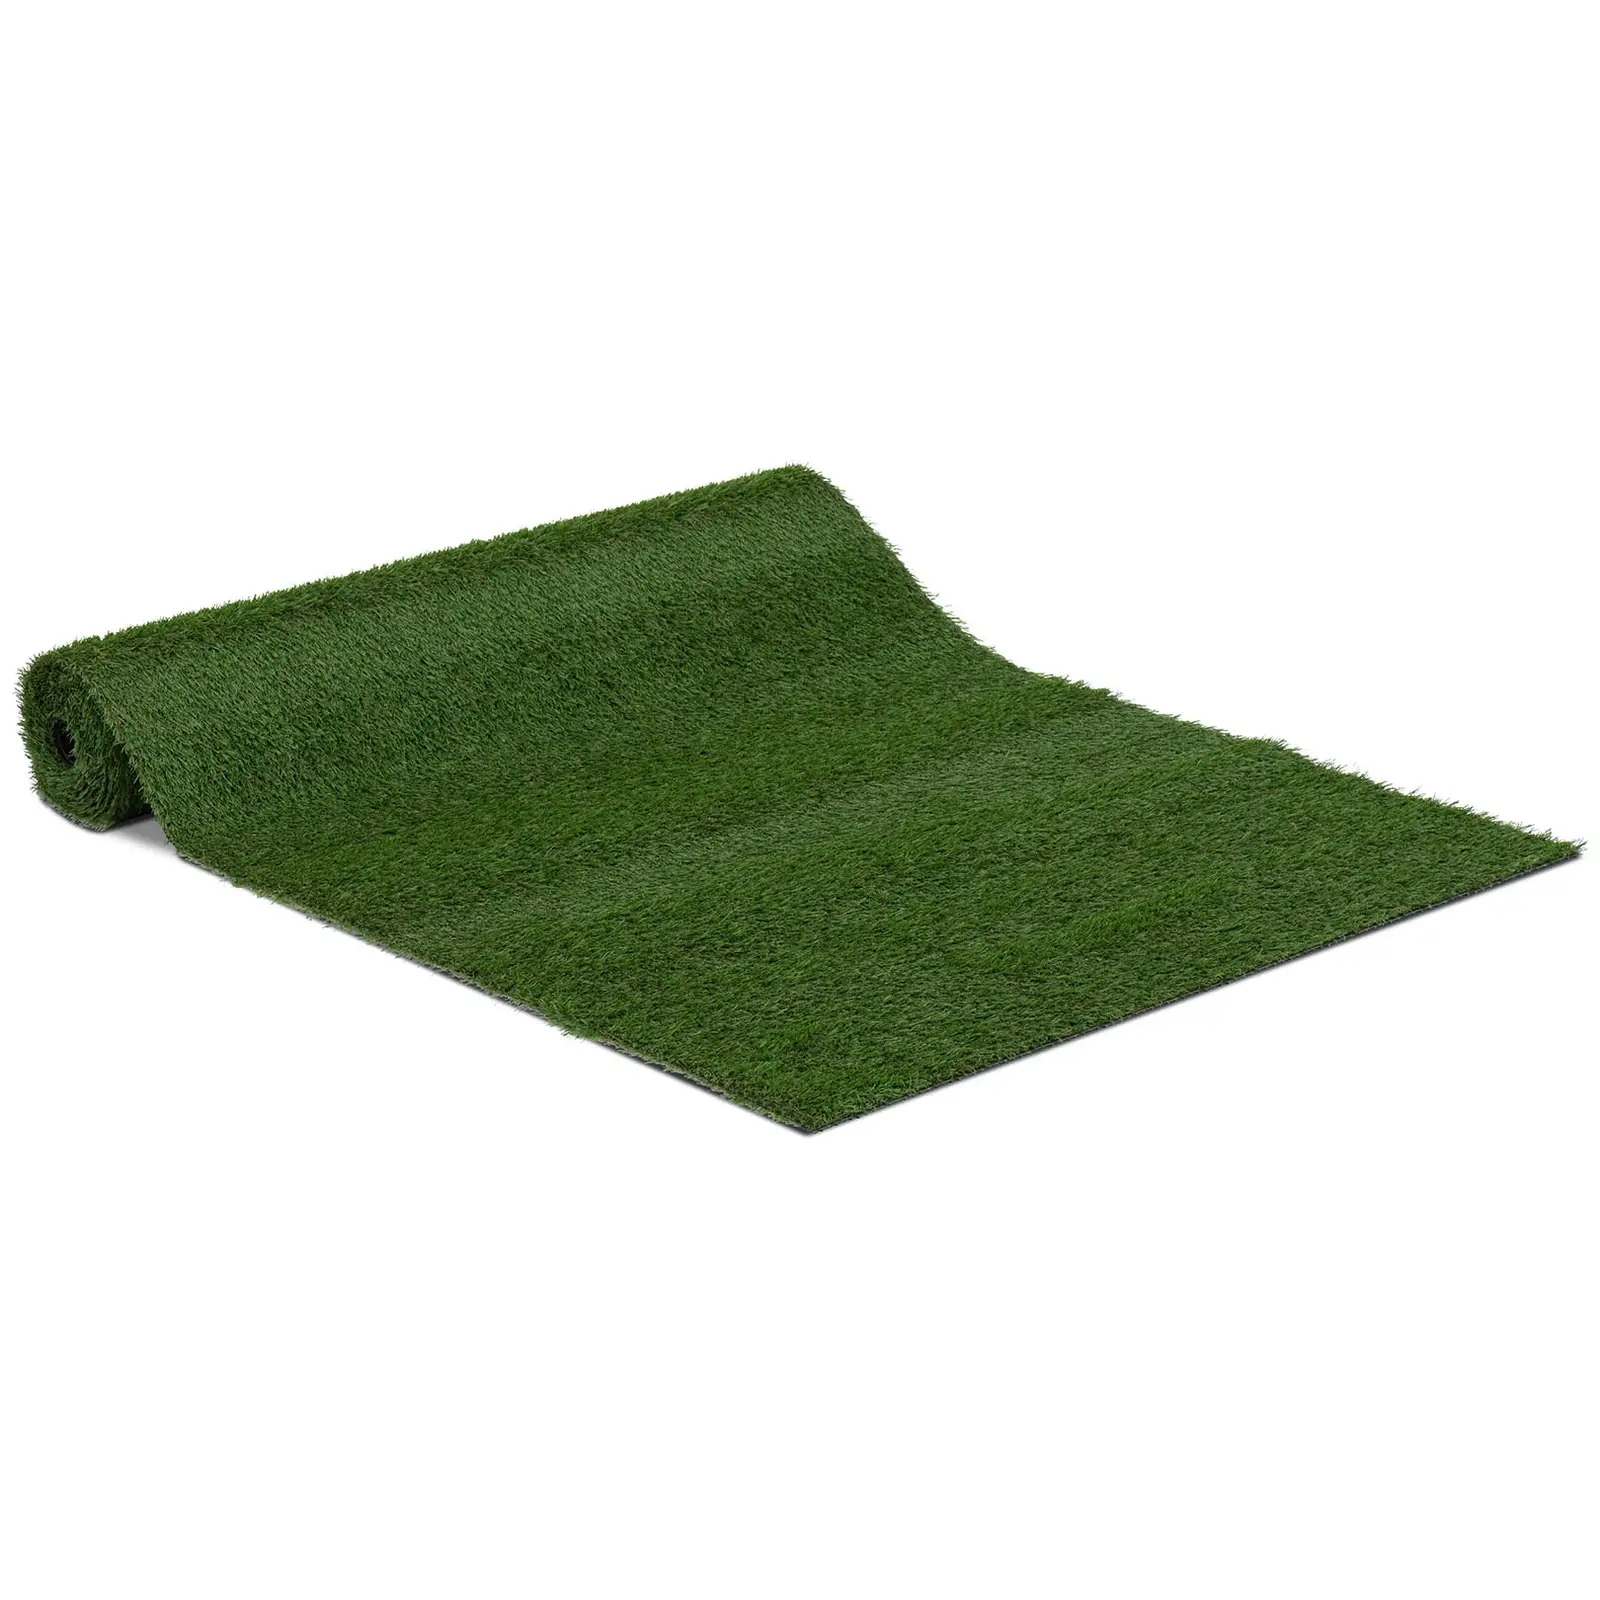 Artificial grass - 100 x 400 cm - Height: 20 mm - Stitch rate: 13/10 cm - UV-resistant